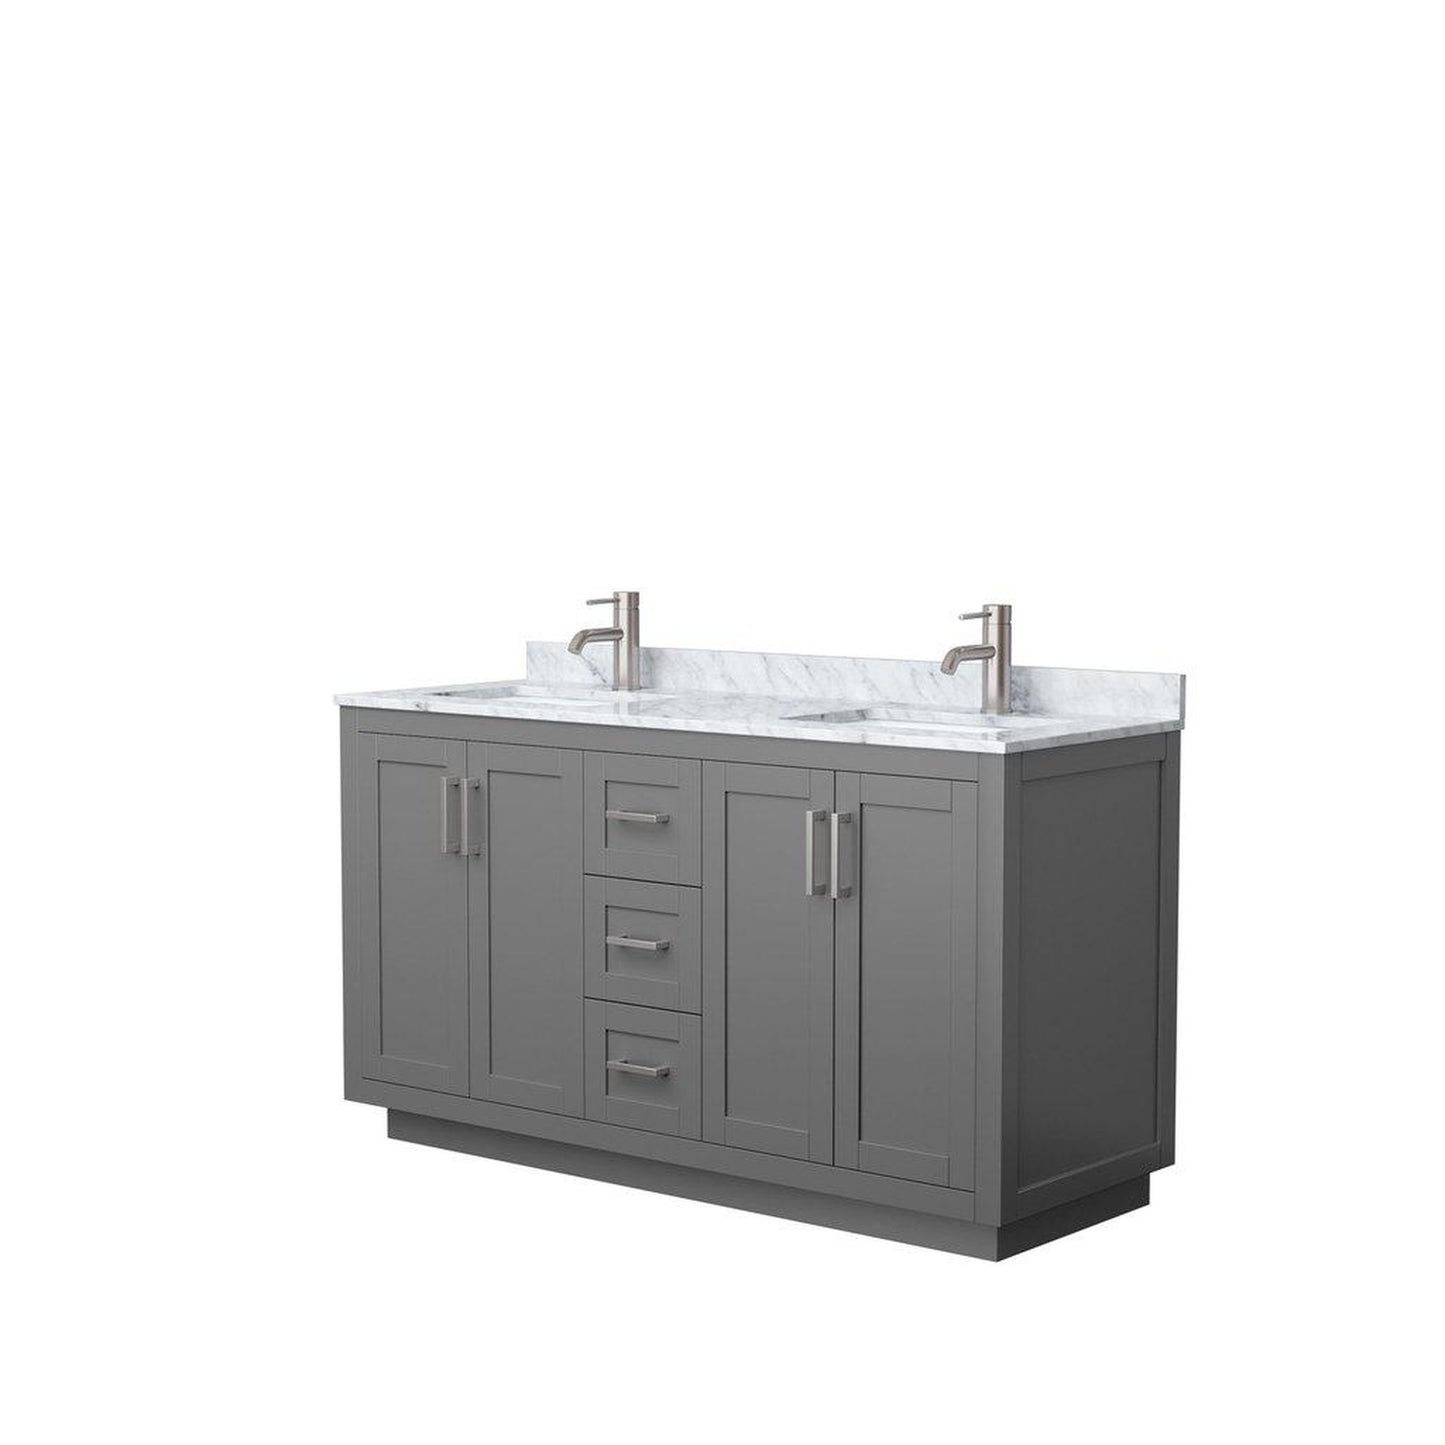 Wyndham Collection Miranda 60" Double Bathroom Dark Gray Vanity Set With White Carrara Marble Countertop, Undermount Square Sink, And Brushed Nickel Trim